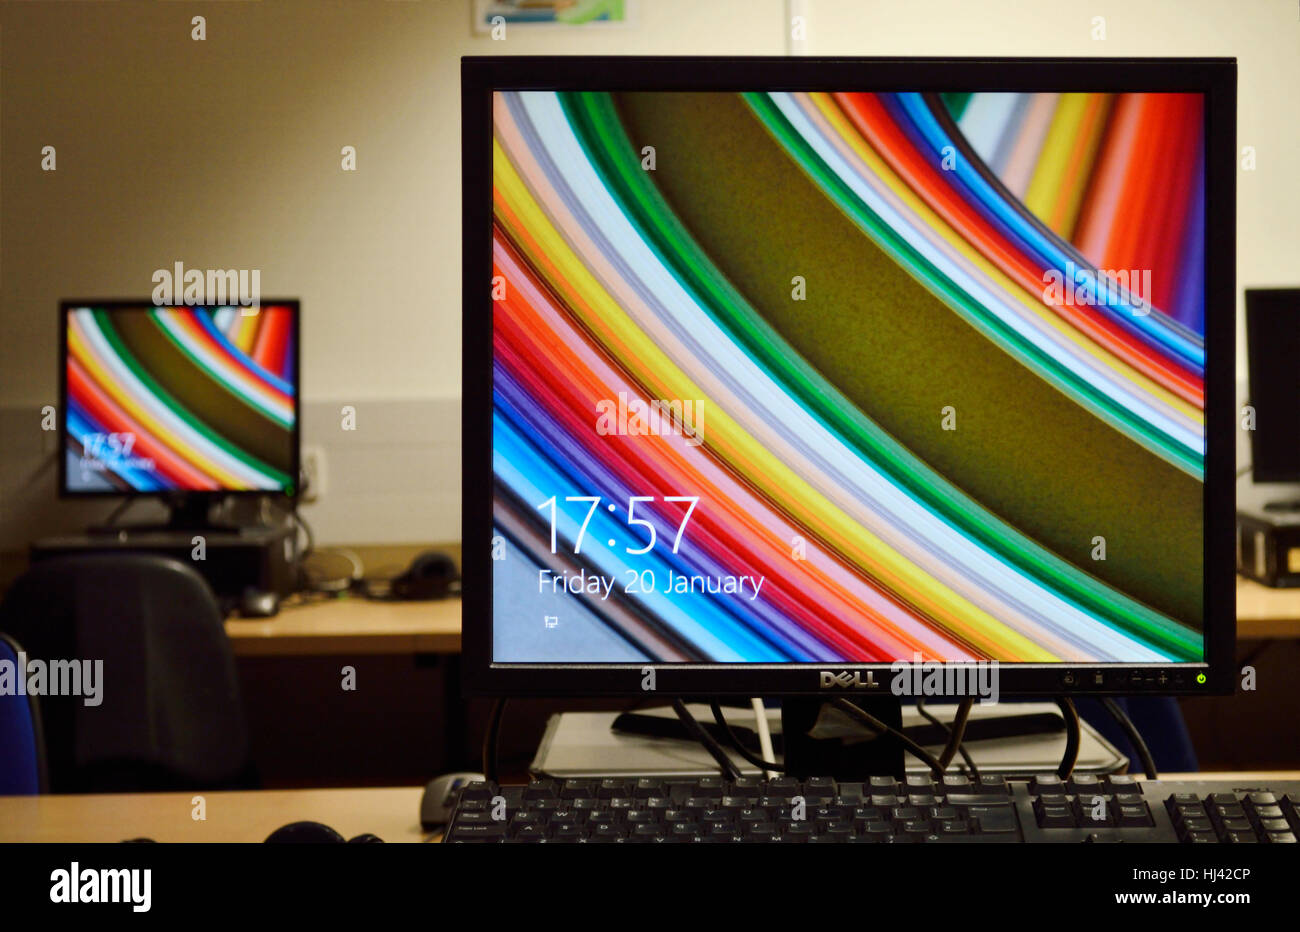 Two computer monitors with screen savers in a classroom at a school. Stock Photo